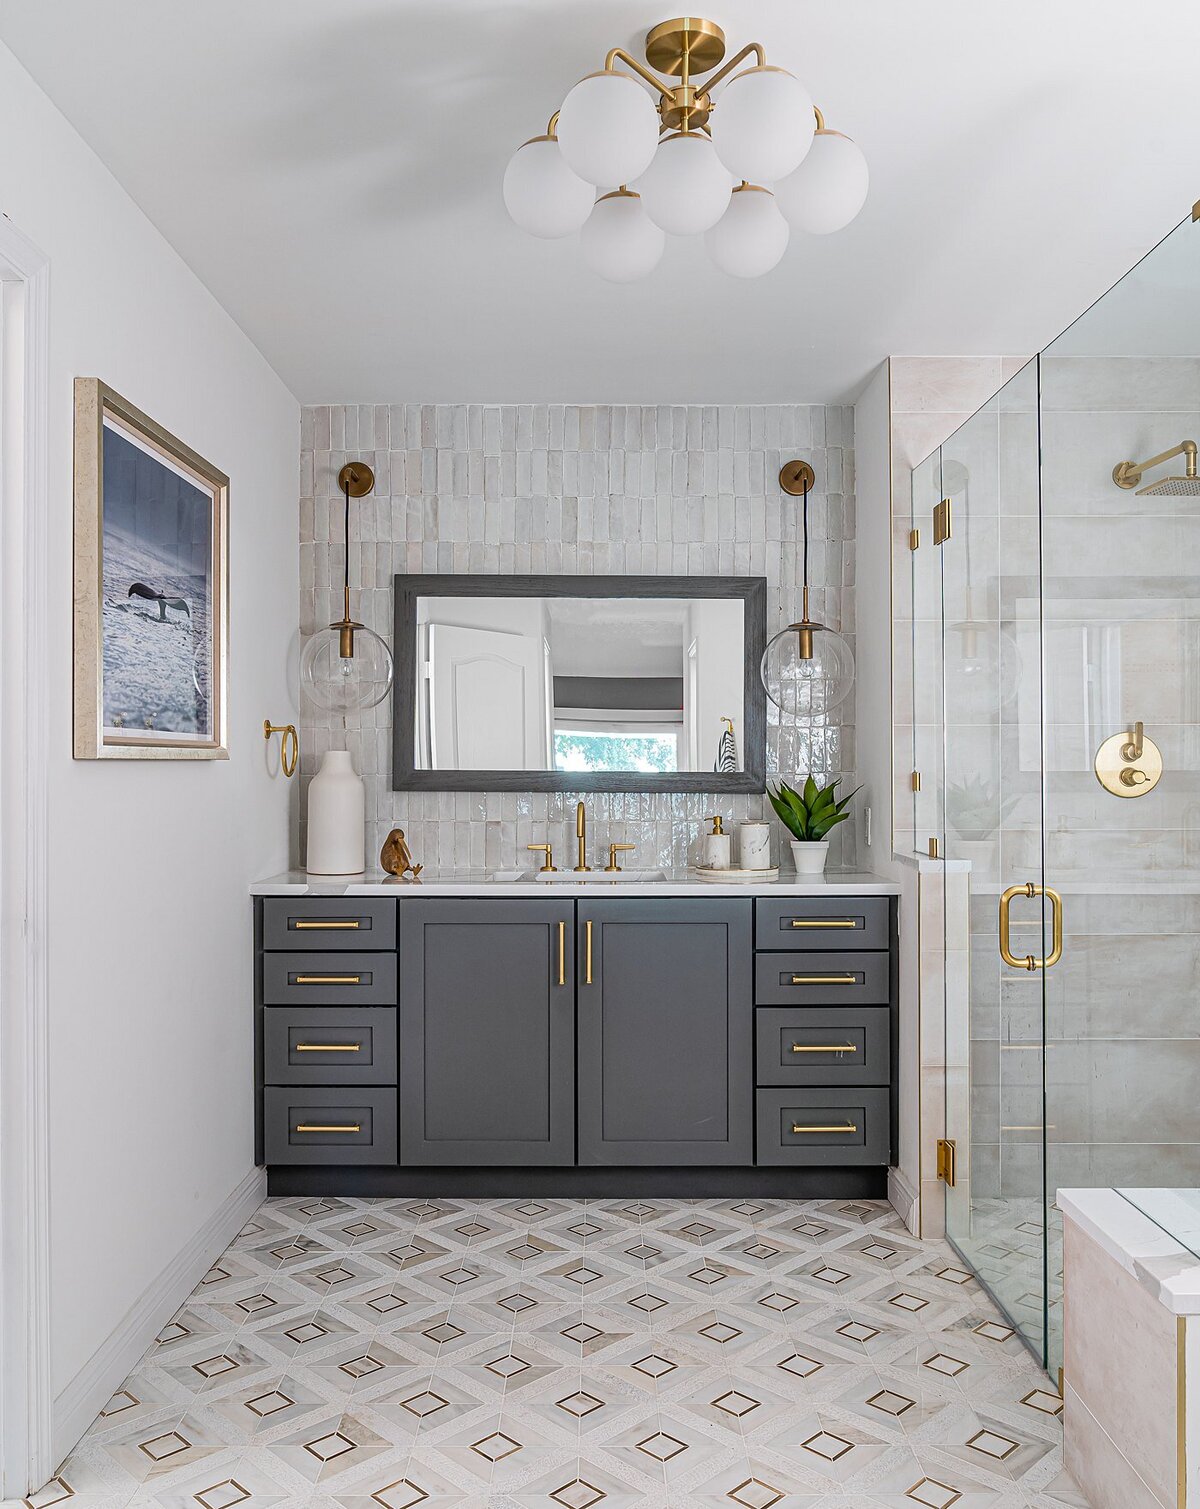 coastal luxury home Master Bathroom gray vanity with brass accents full service interior design by Island Home Interiors Lake Nona